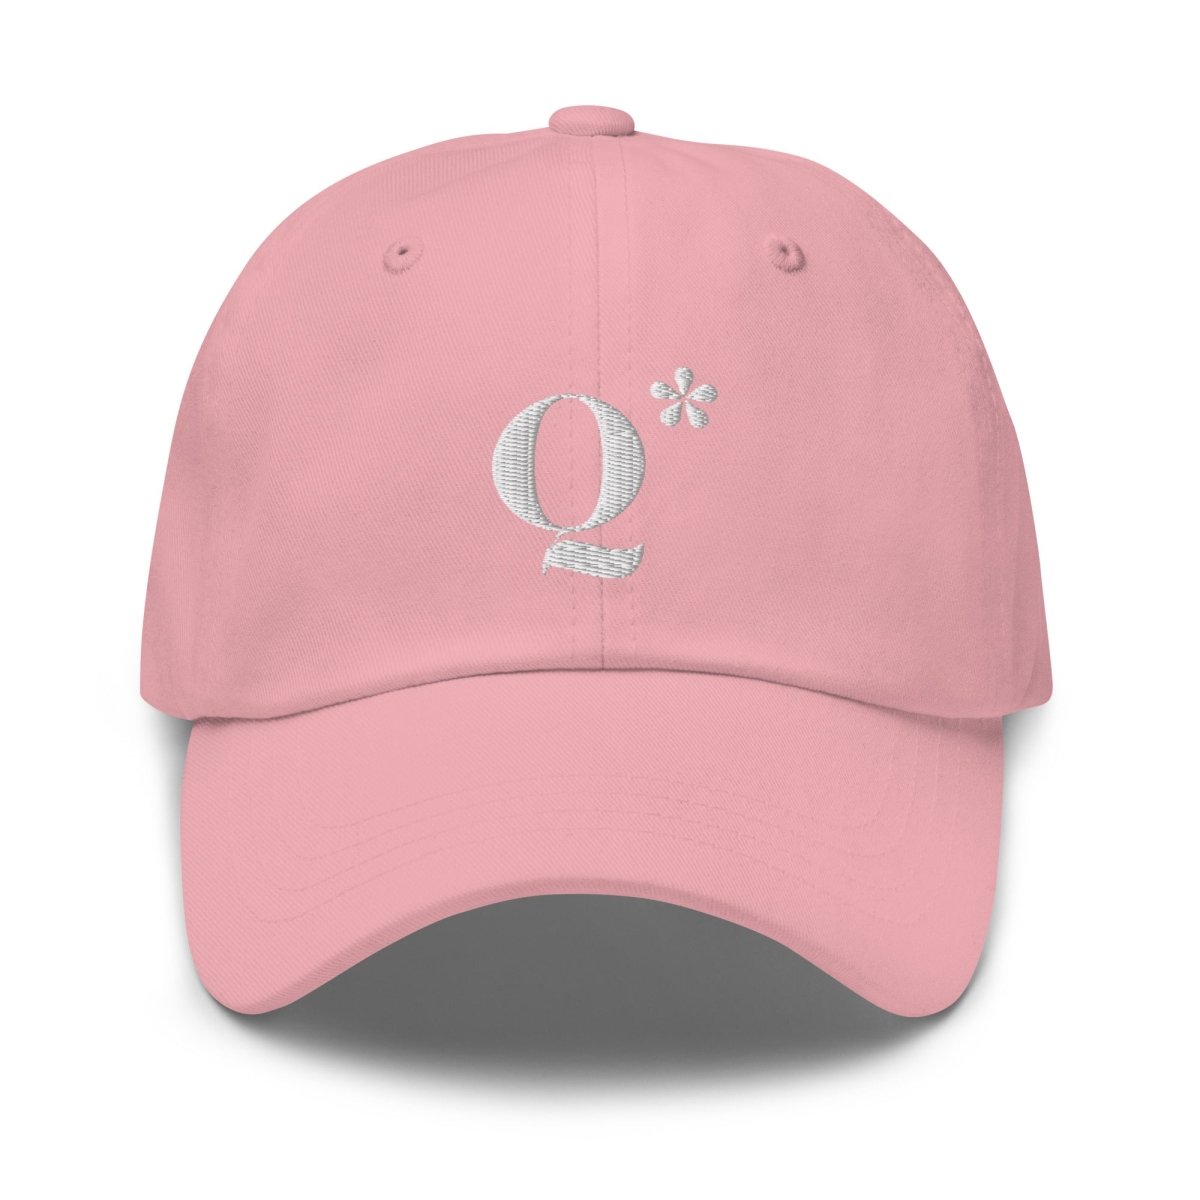 Q* (Q - Star) Embroidered Cap 3 - Pink - AI Store